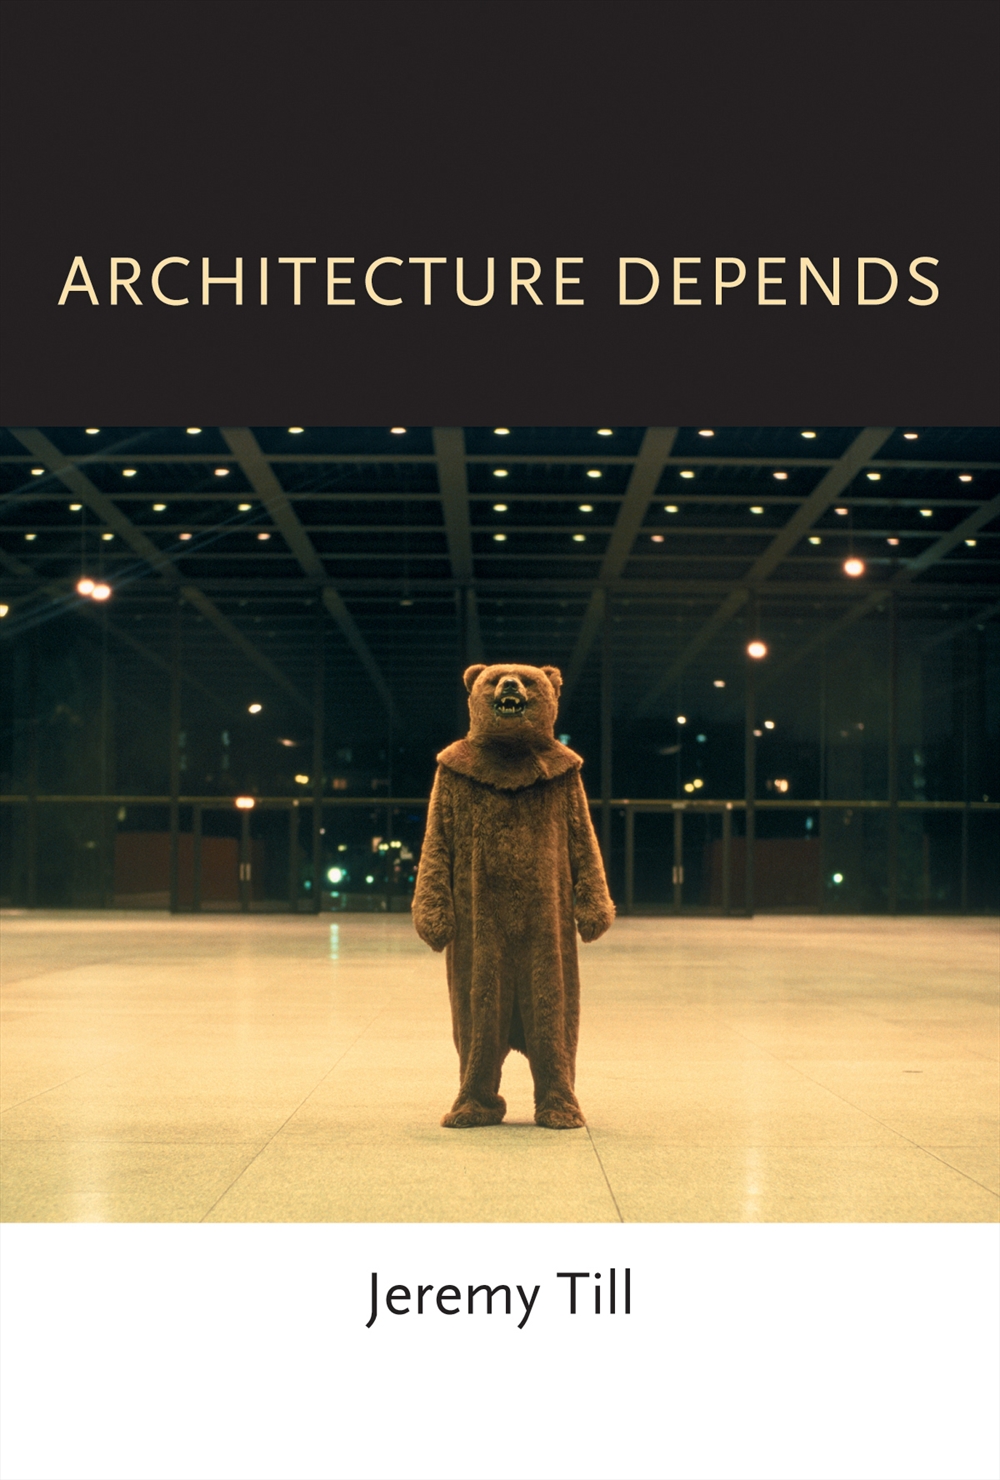 Archisearch ARCHITECTURE DEPENDS BY JEREMY TILL